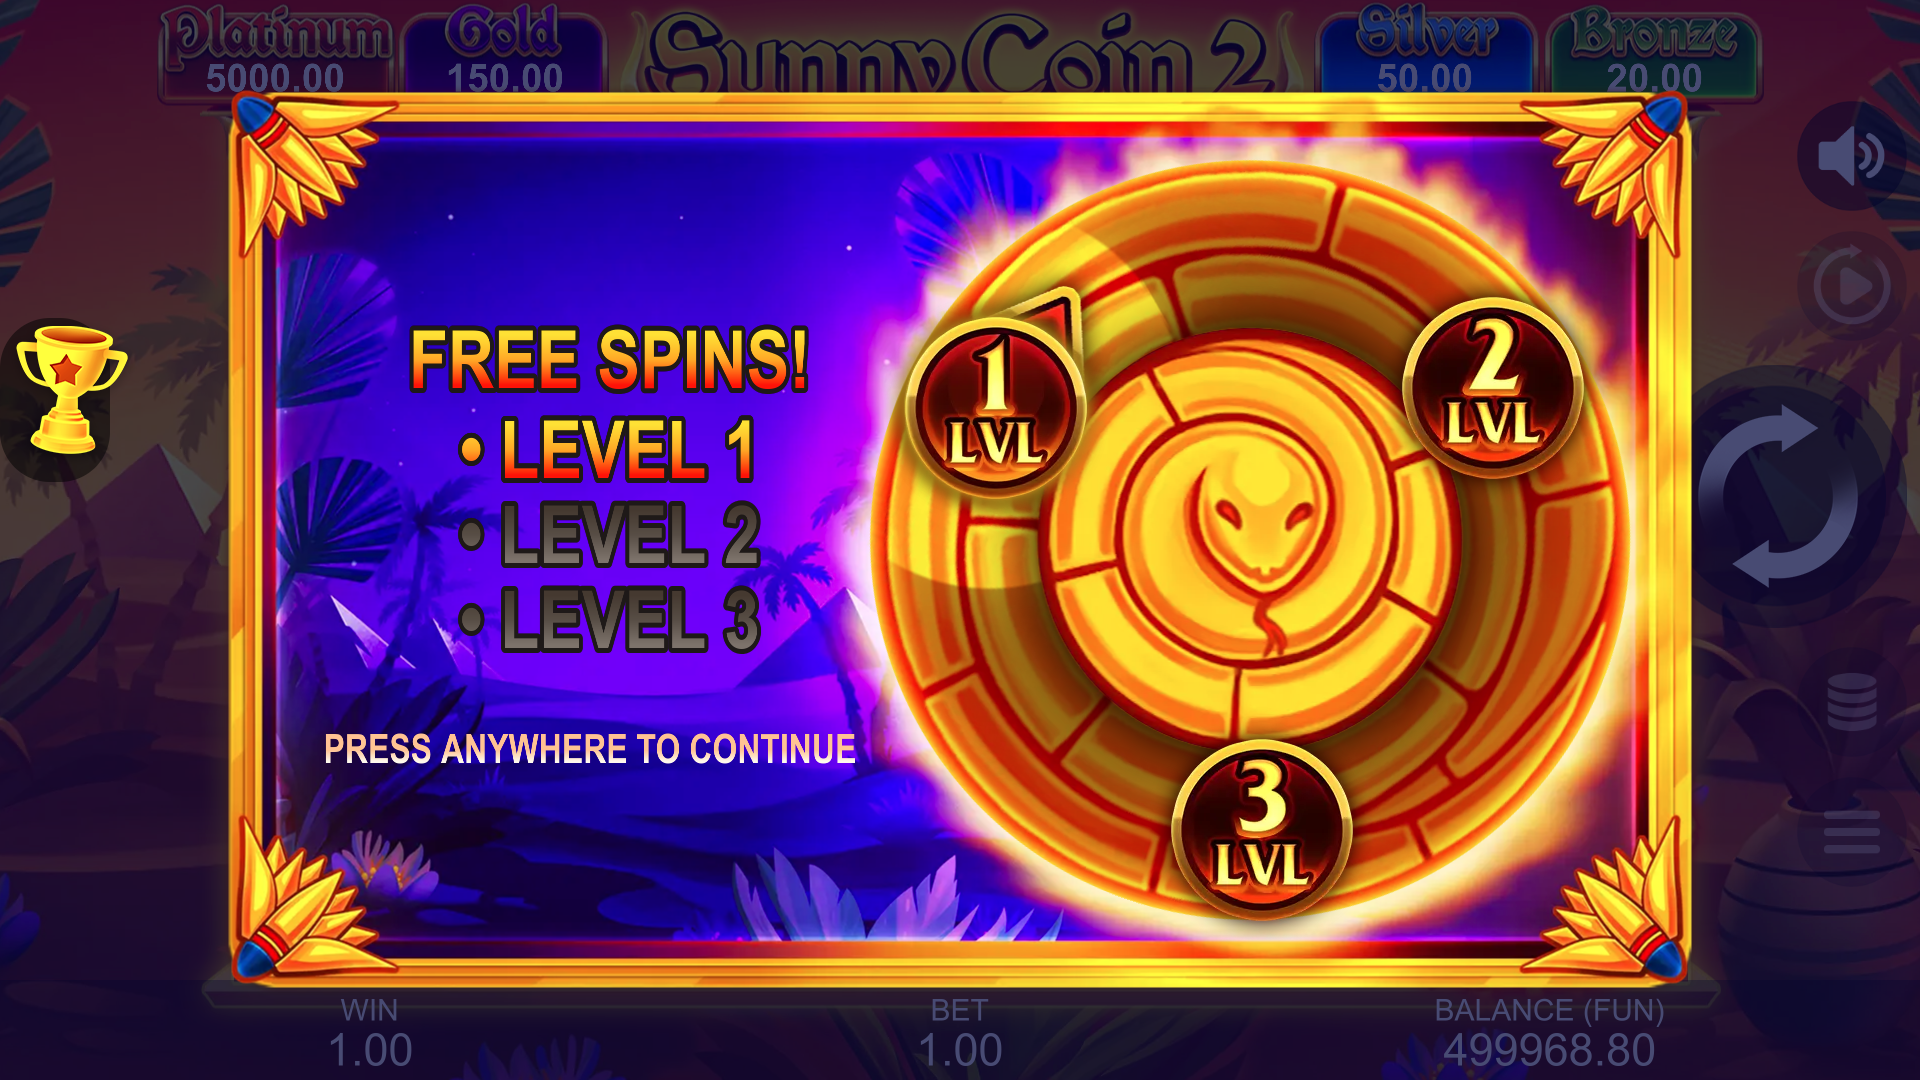 Sunny Coin 2: Hold the Spin Free Spins